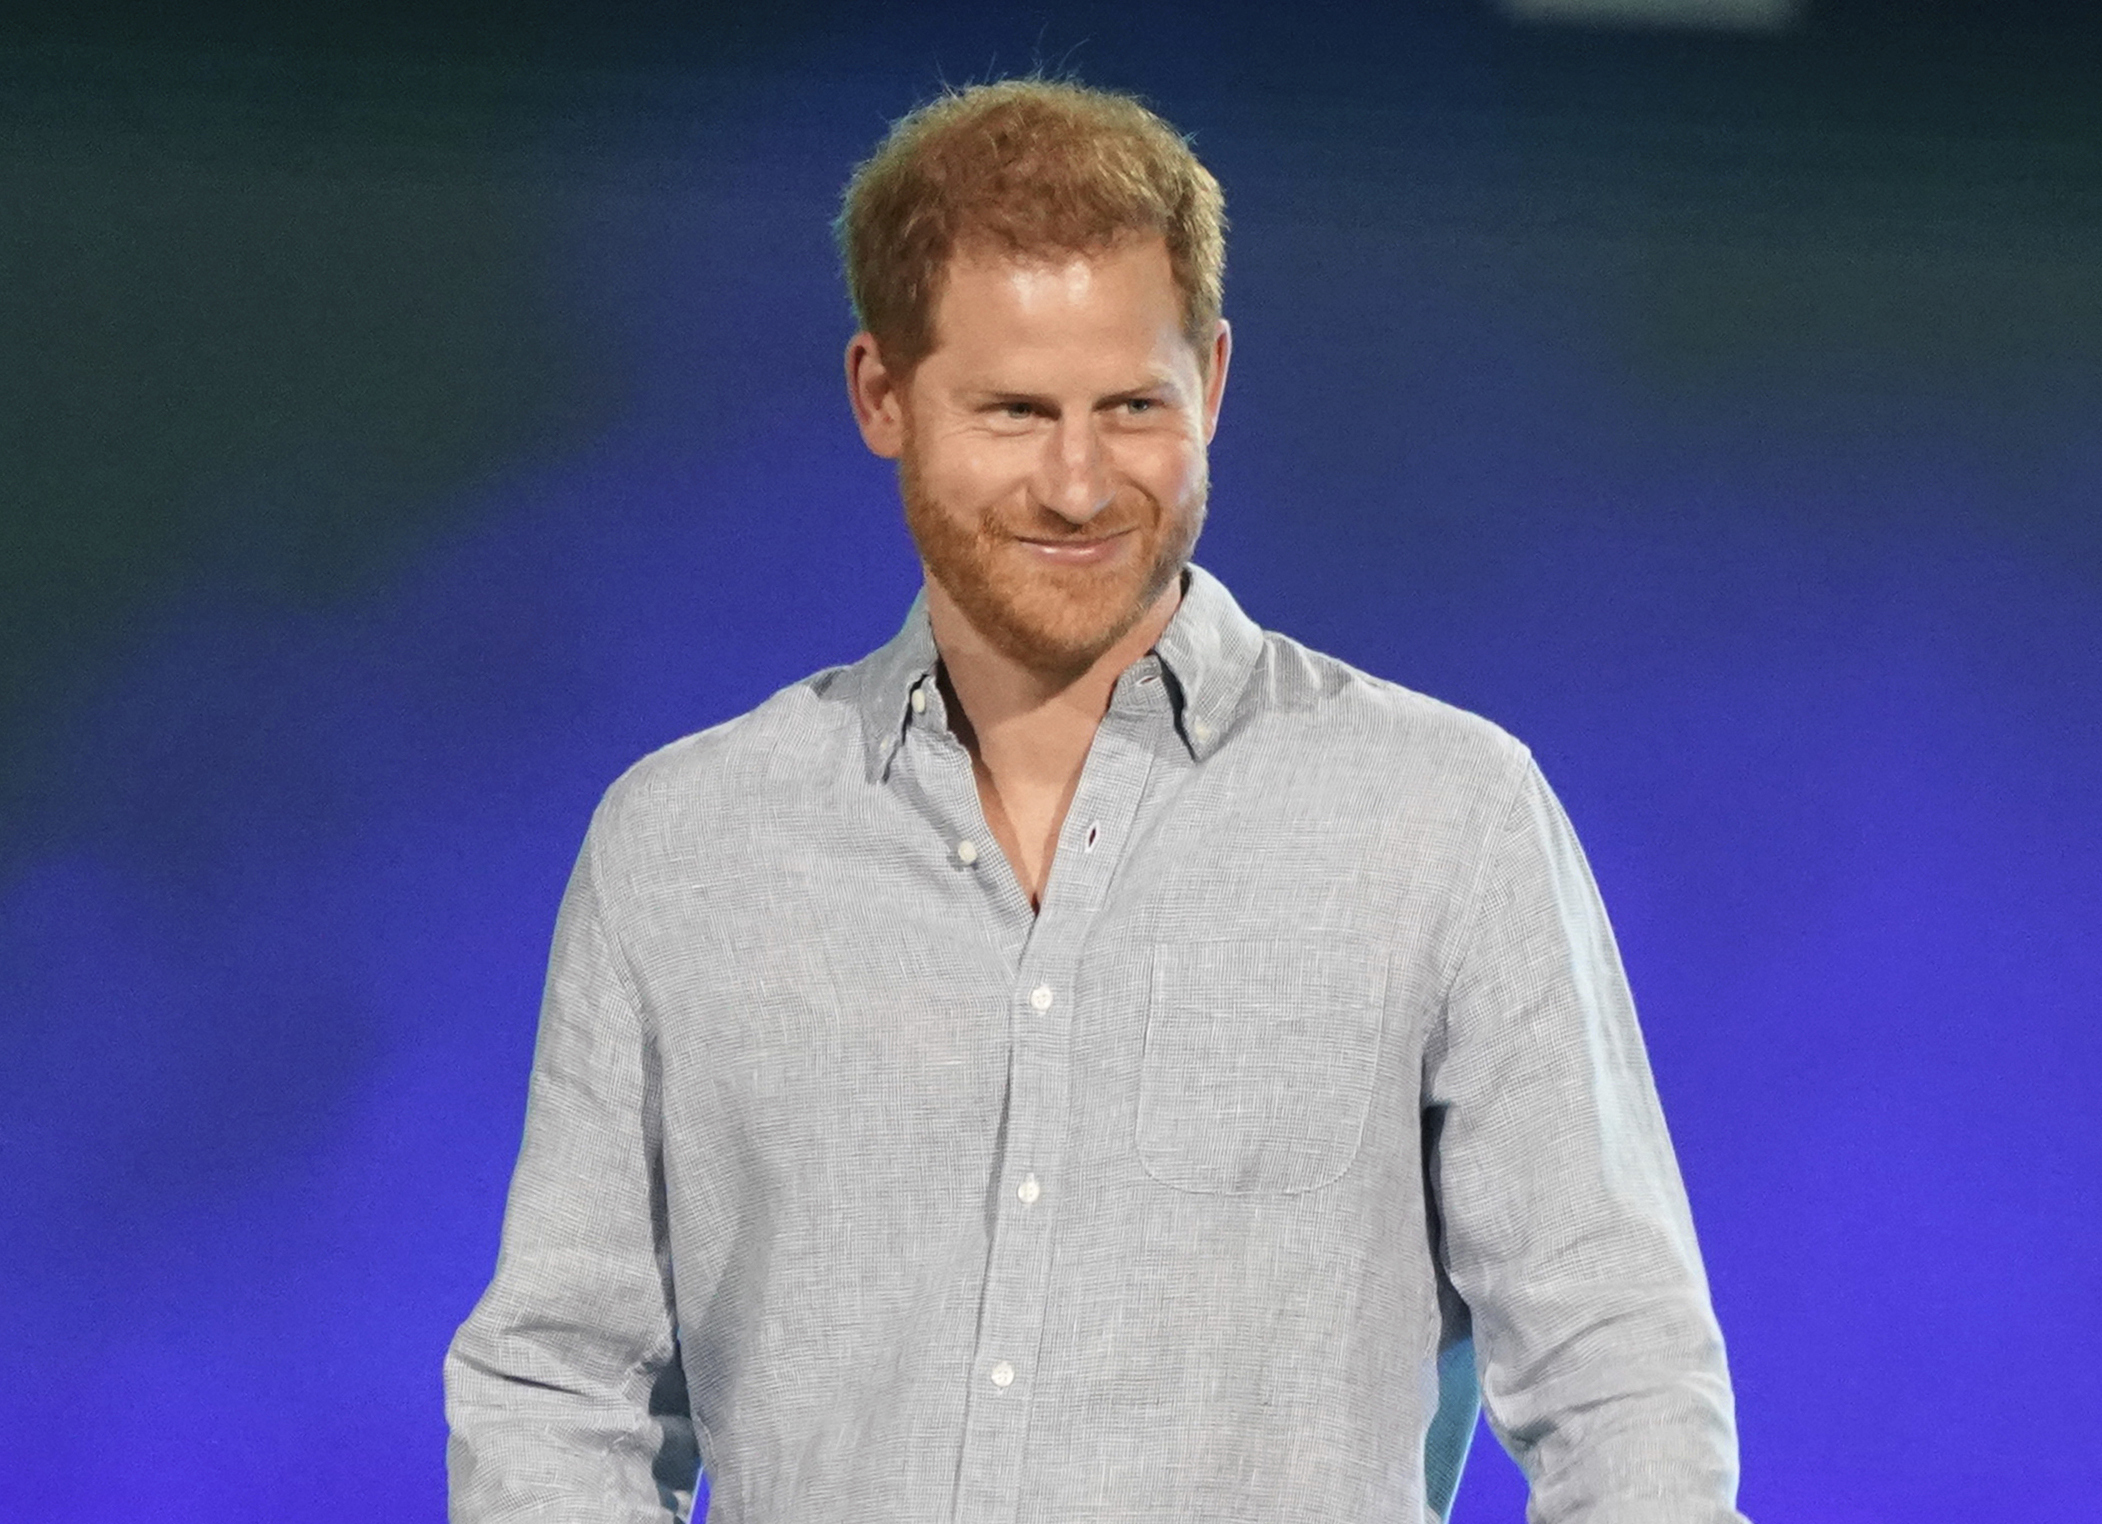 FILE - In this May 2, 2021, file photo, Prince Harry, Duke of Sussex, speaks at "Vax Live: The Concert to Reunite the World" in Inglewood, Calif. Prince Harry took a break from paternity leave to “spread the news” about his Invictus Games. The Duke of Sussex announced in an Instagram post Wednesday, June 9, 2021, that the Invictus Games will take place in Düsseldorf, Germany, in 2023. (Photo by Jordan Strauss/Invision/AP, File)